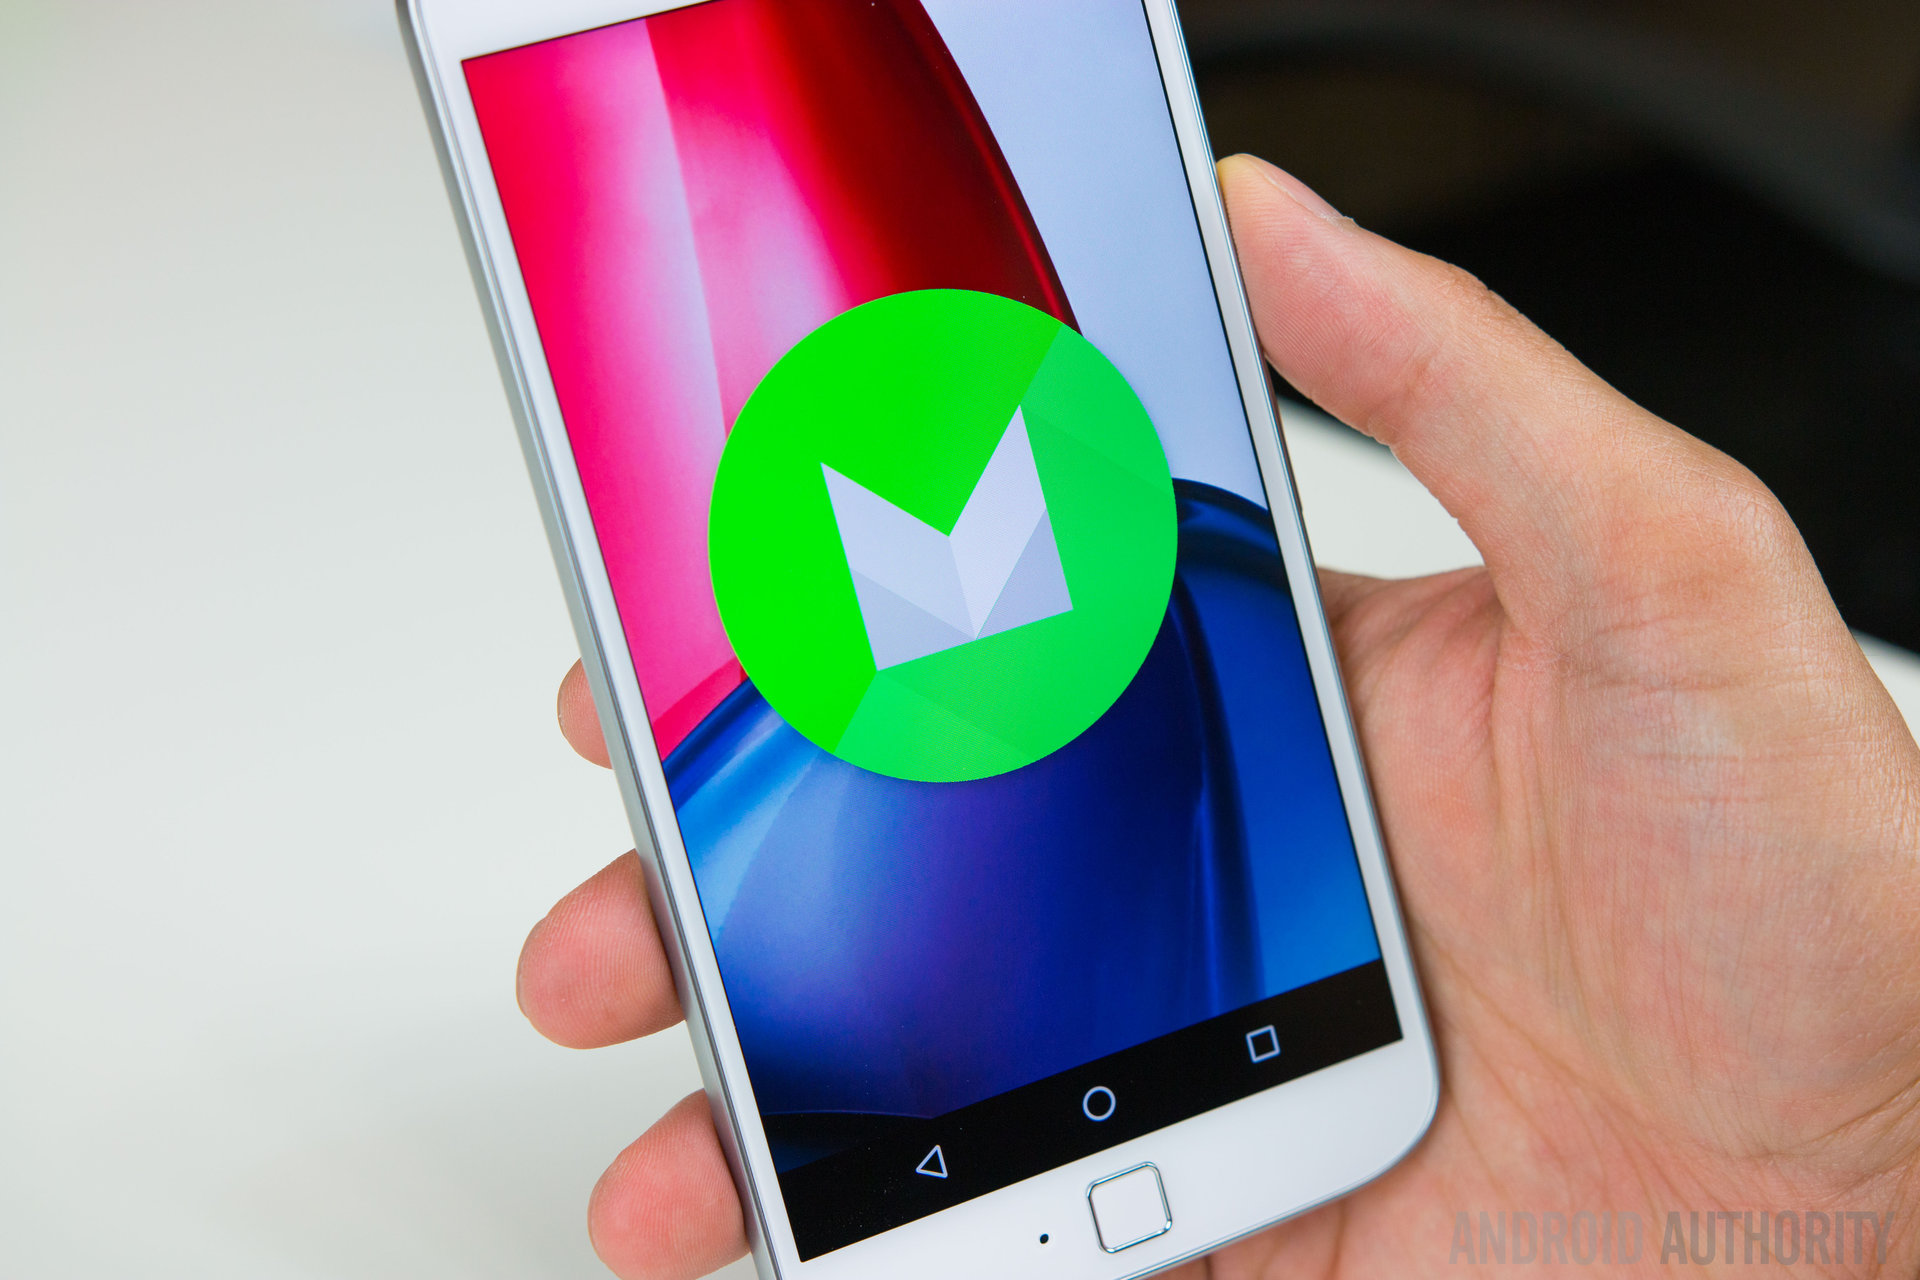 kwaliteit Cater Meisje Motorola Moto G4 Plus review - Android Authority